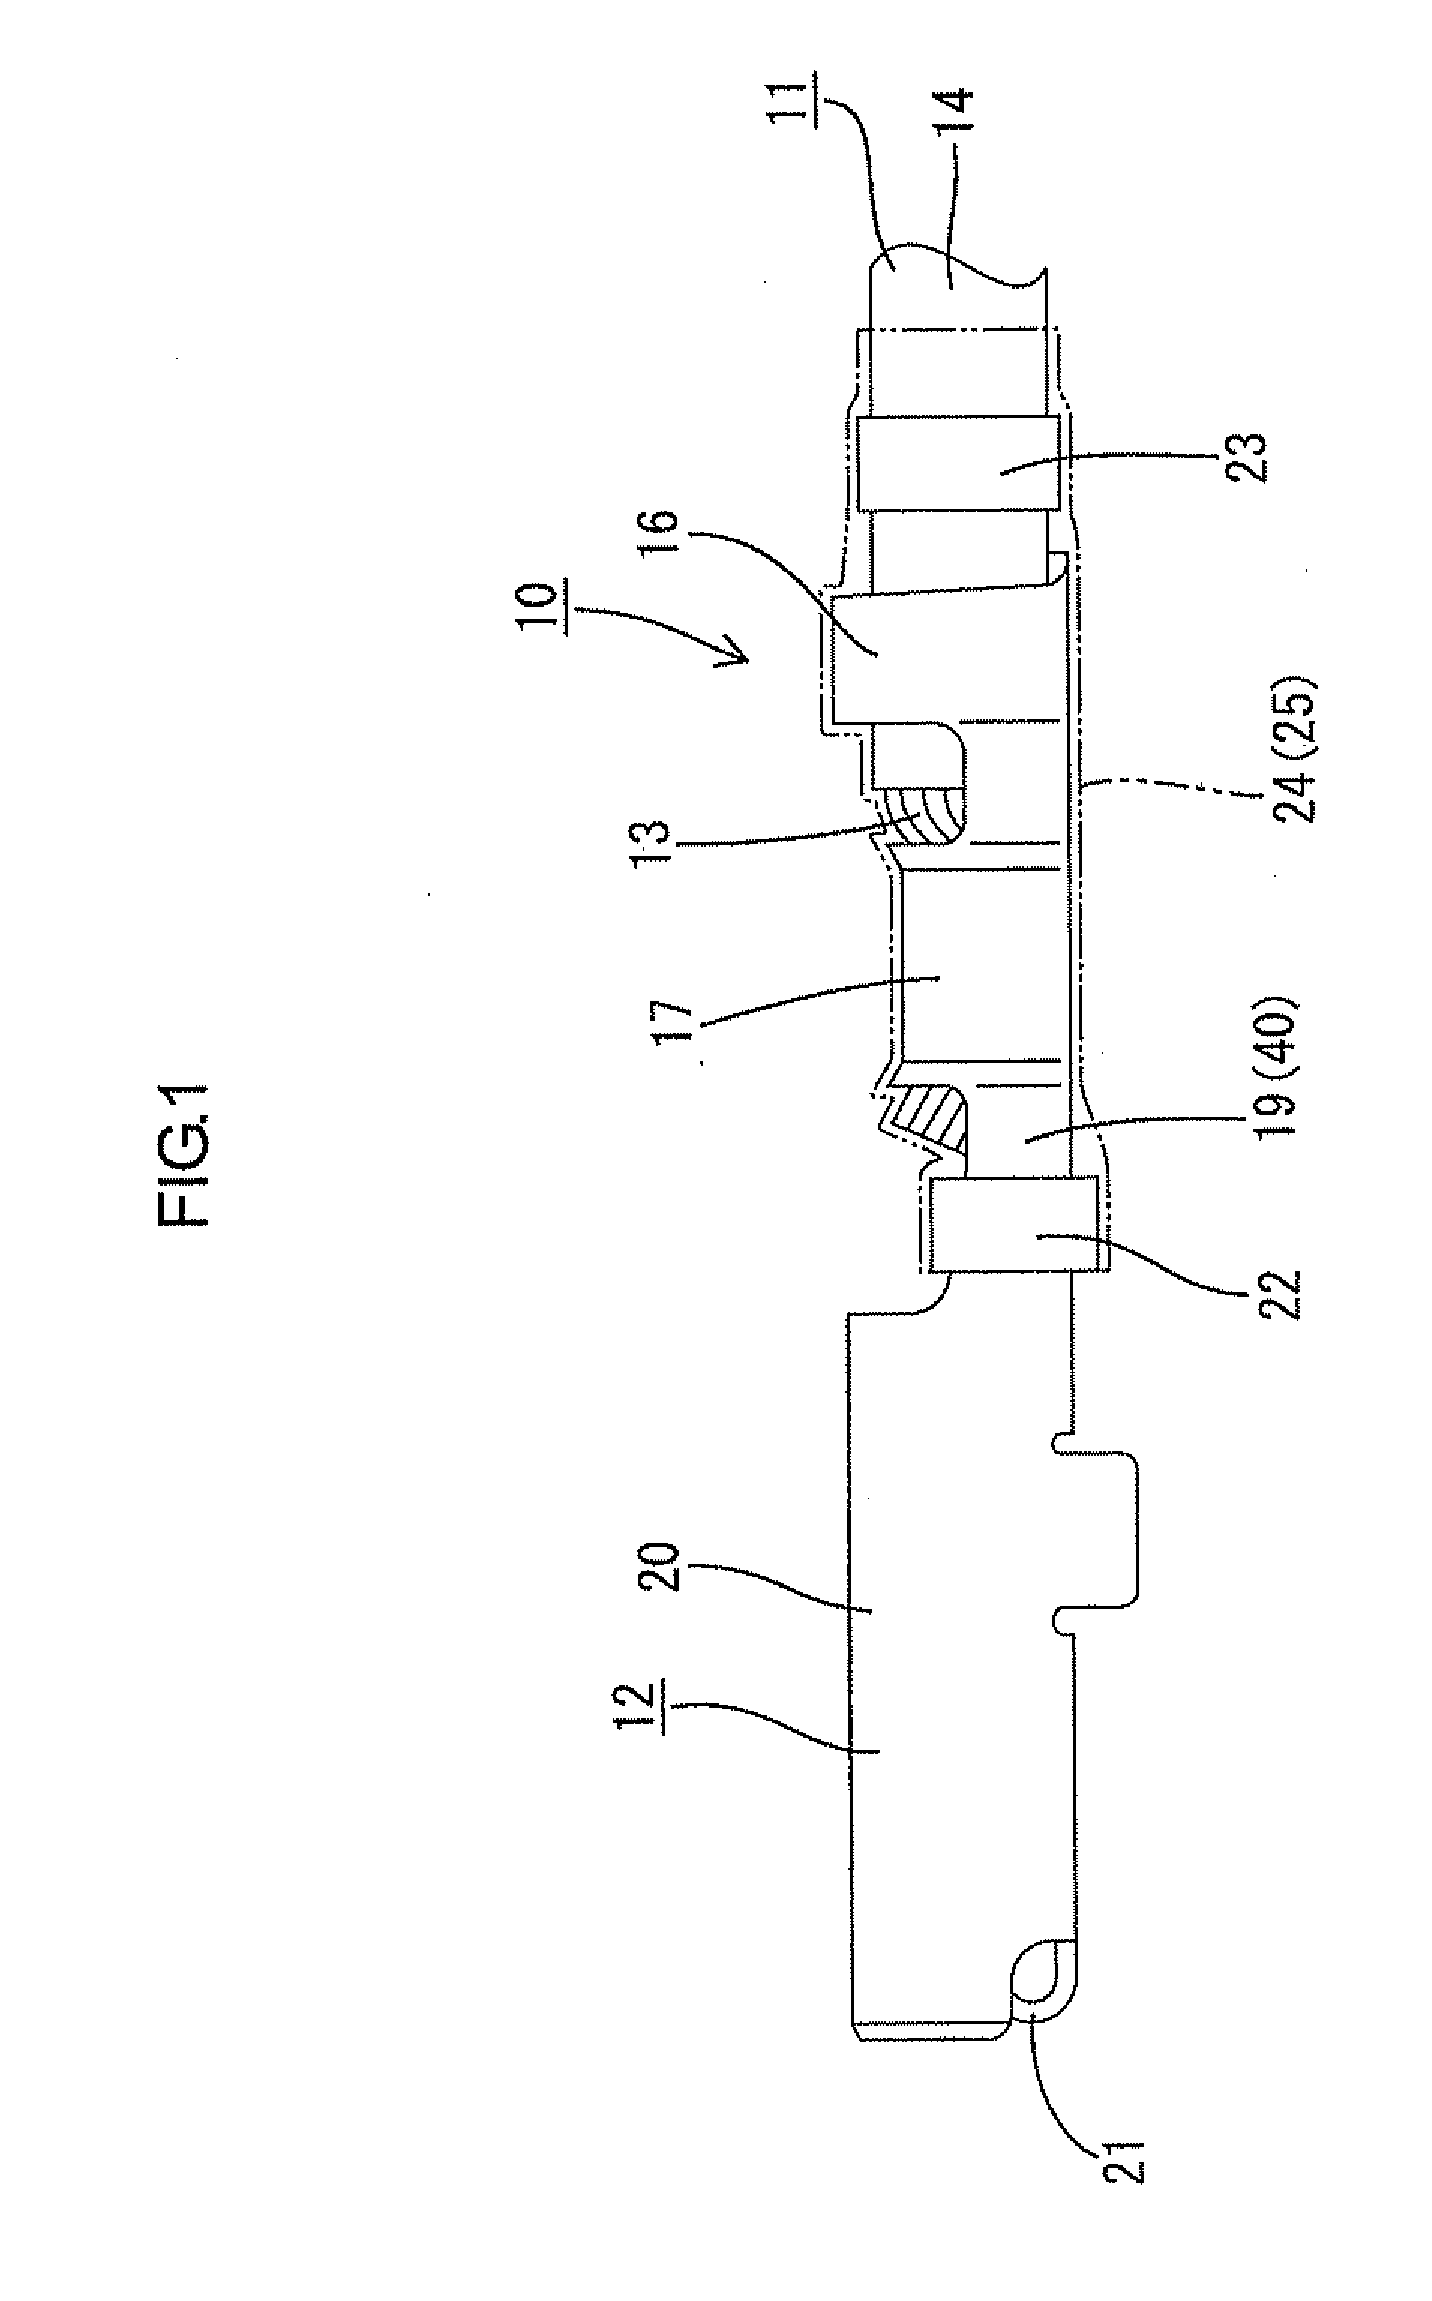 Electric wire with terminal and connector